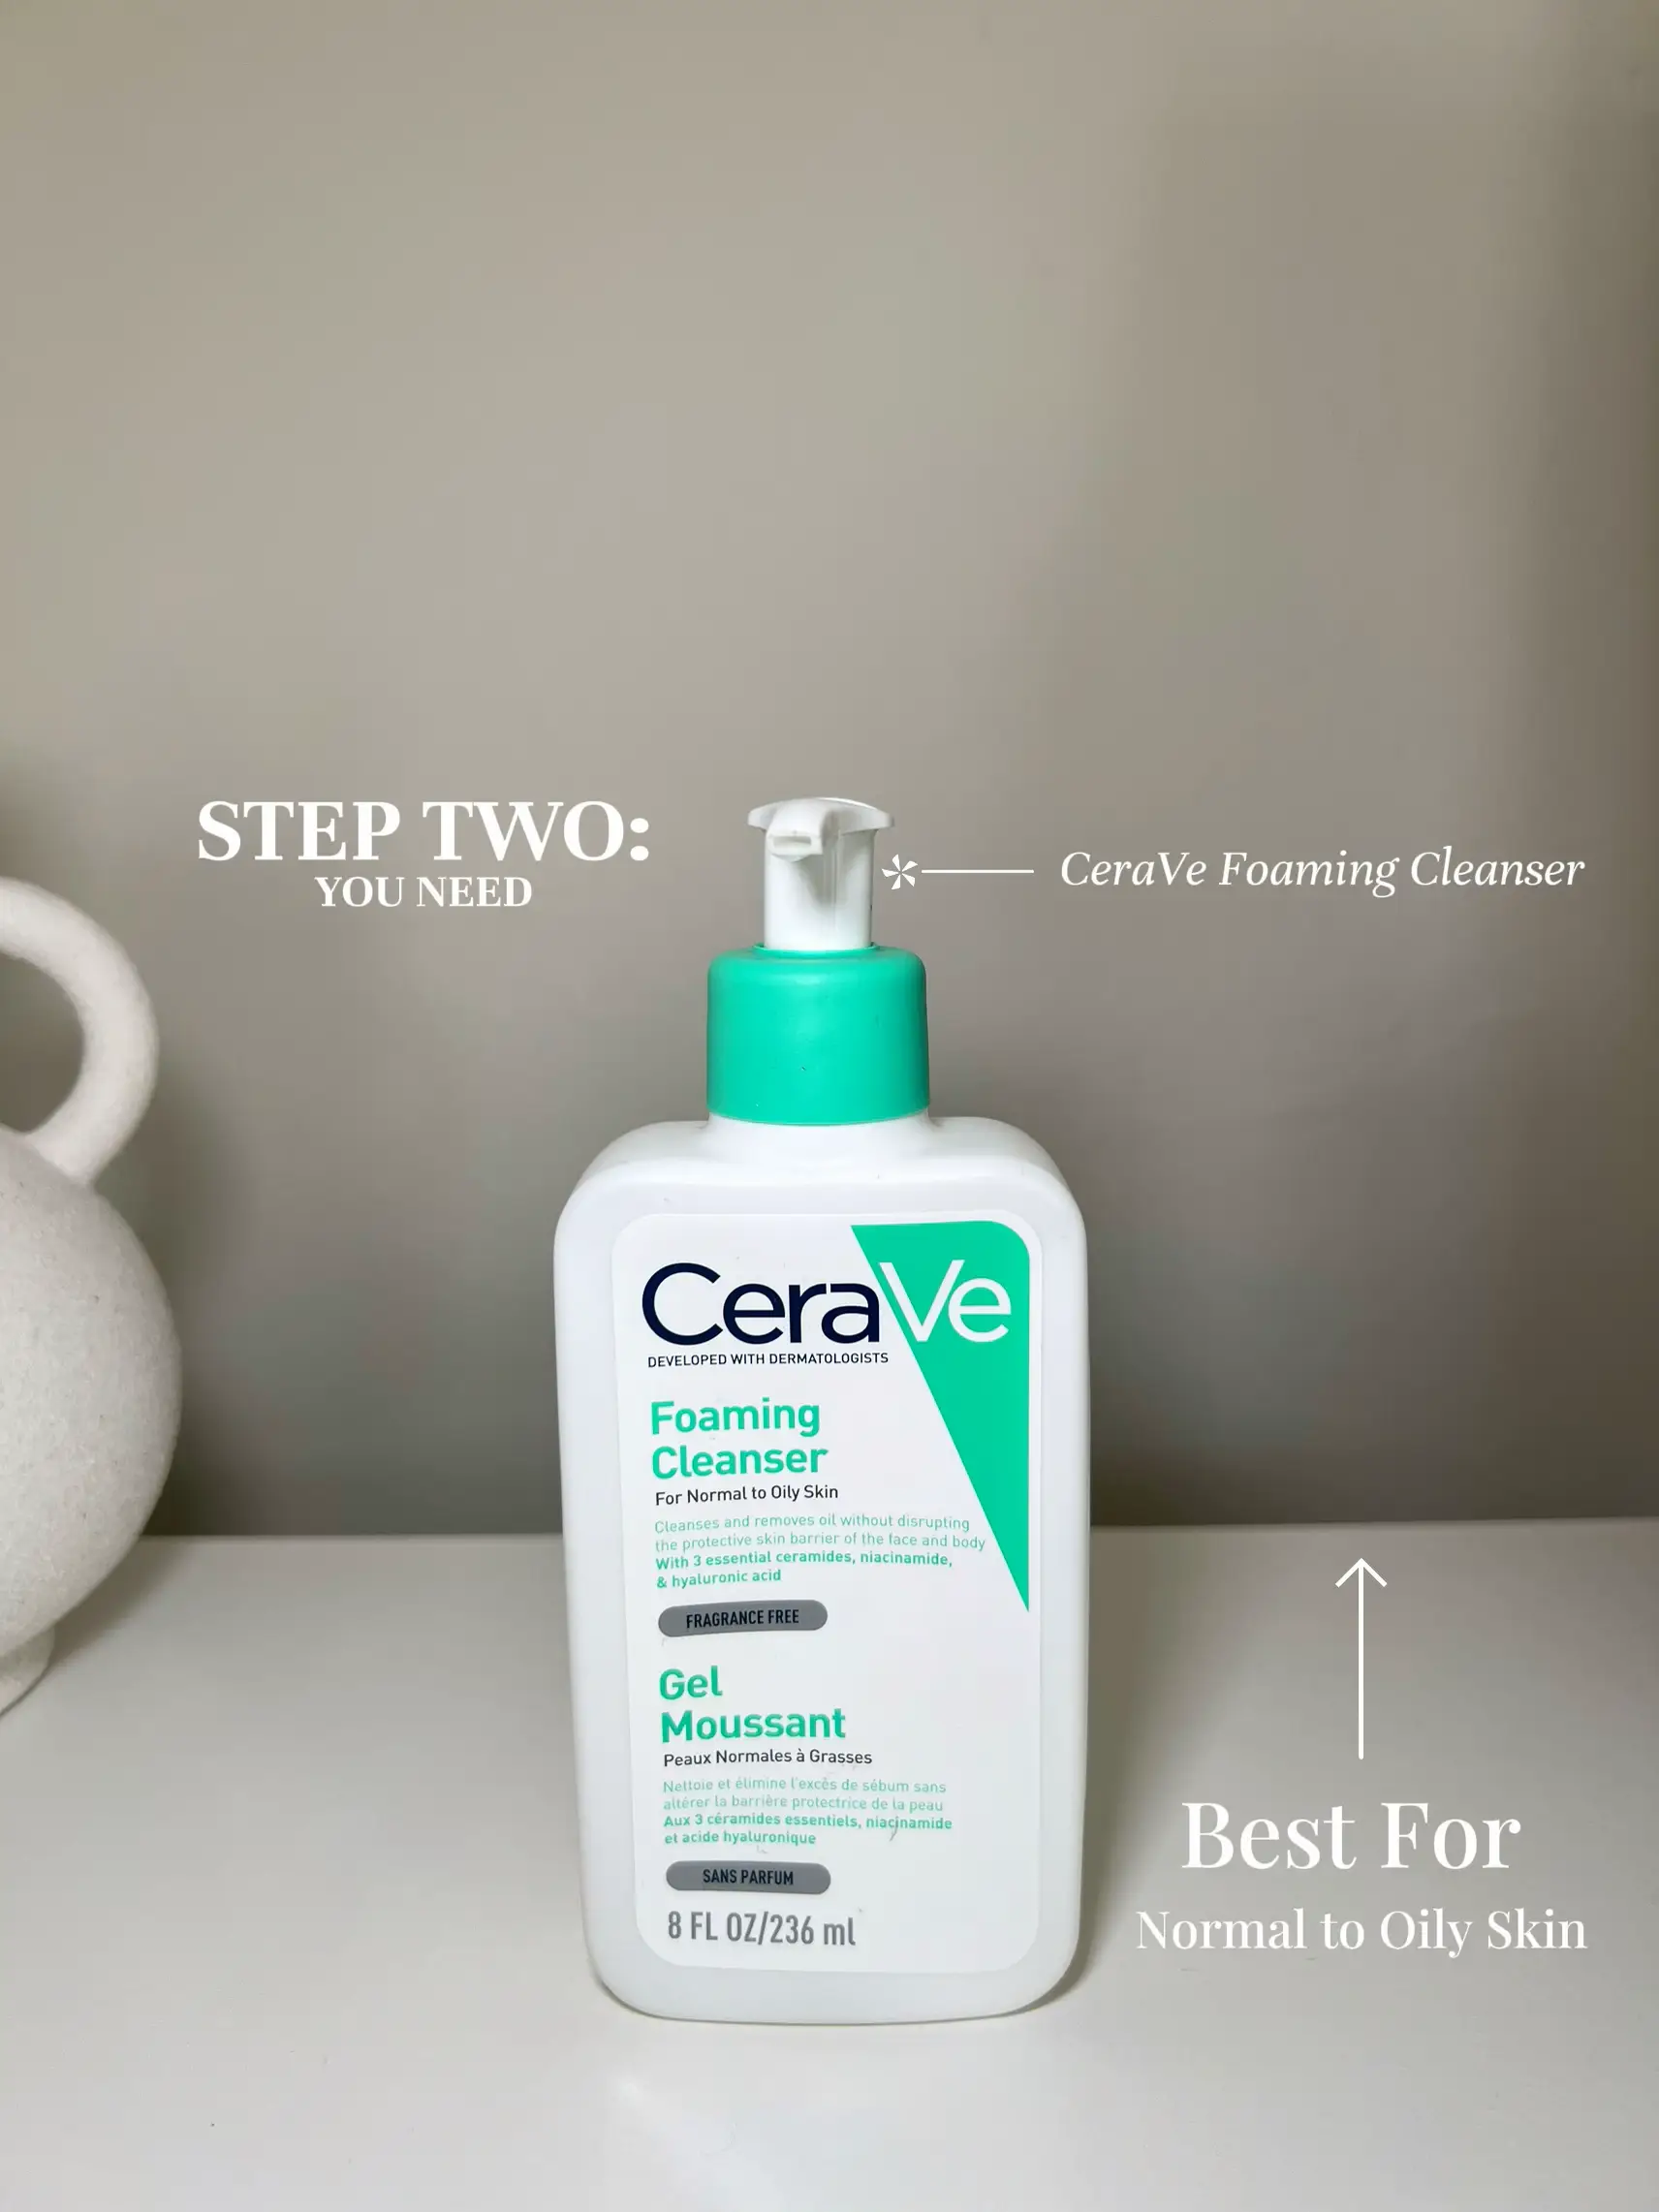  CeraVe Daily Moisturizing Lotion for Dry Skin, Body Lotion &  Face Moisturizer with Hyaluronic Acid and Ceramides, Daily Moisturizer, Fragrance Free, Oil-Free